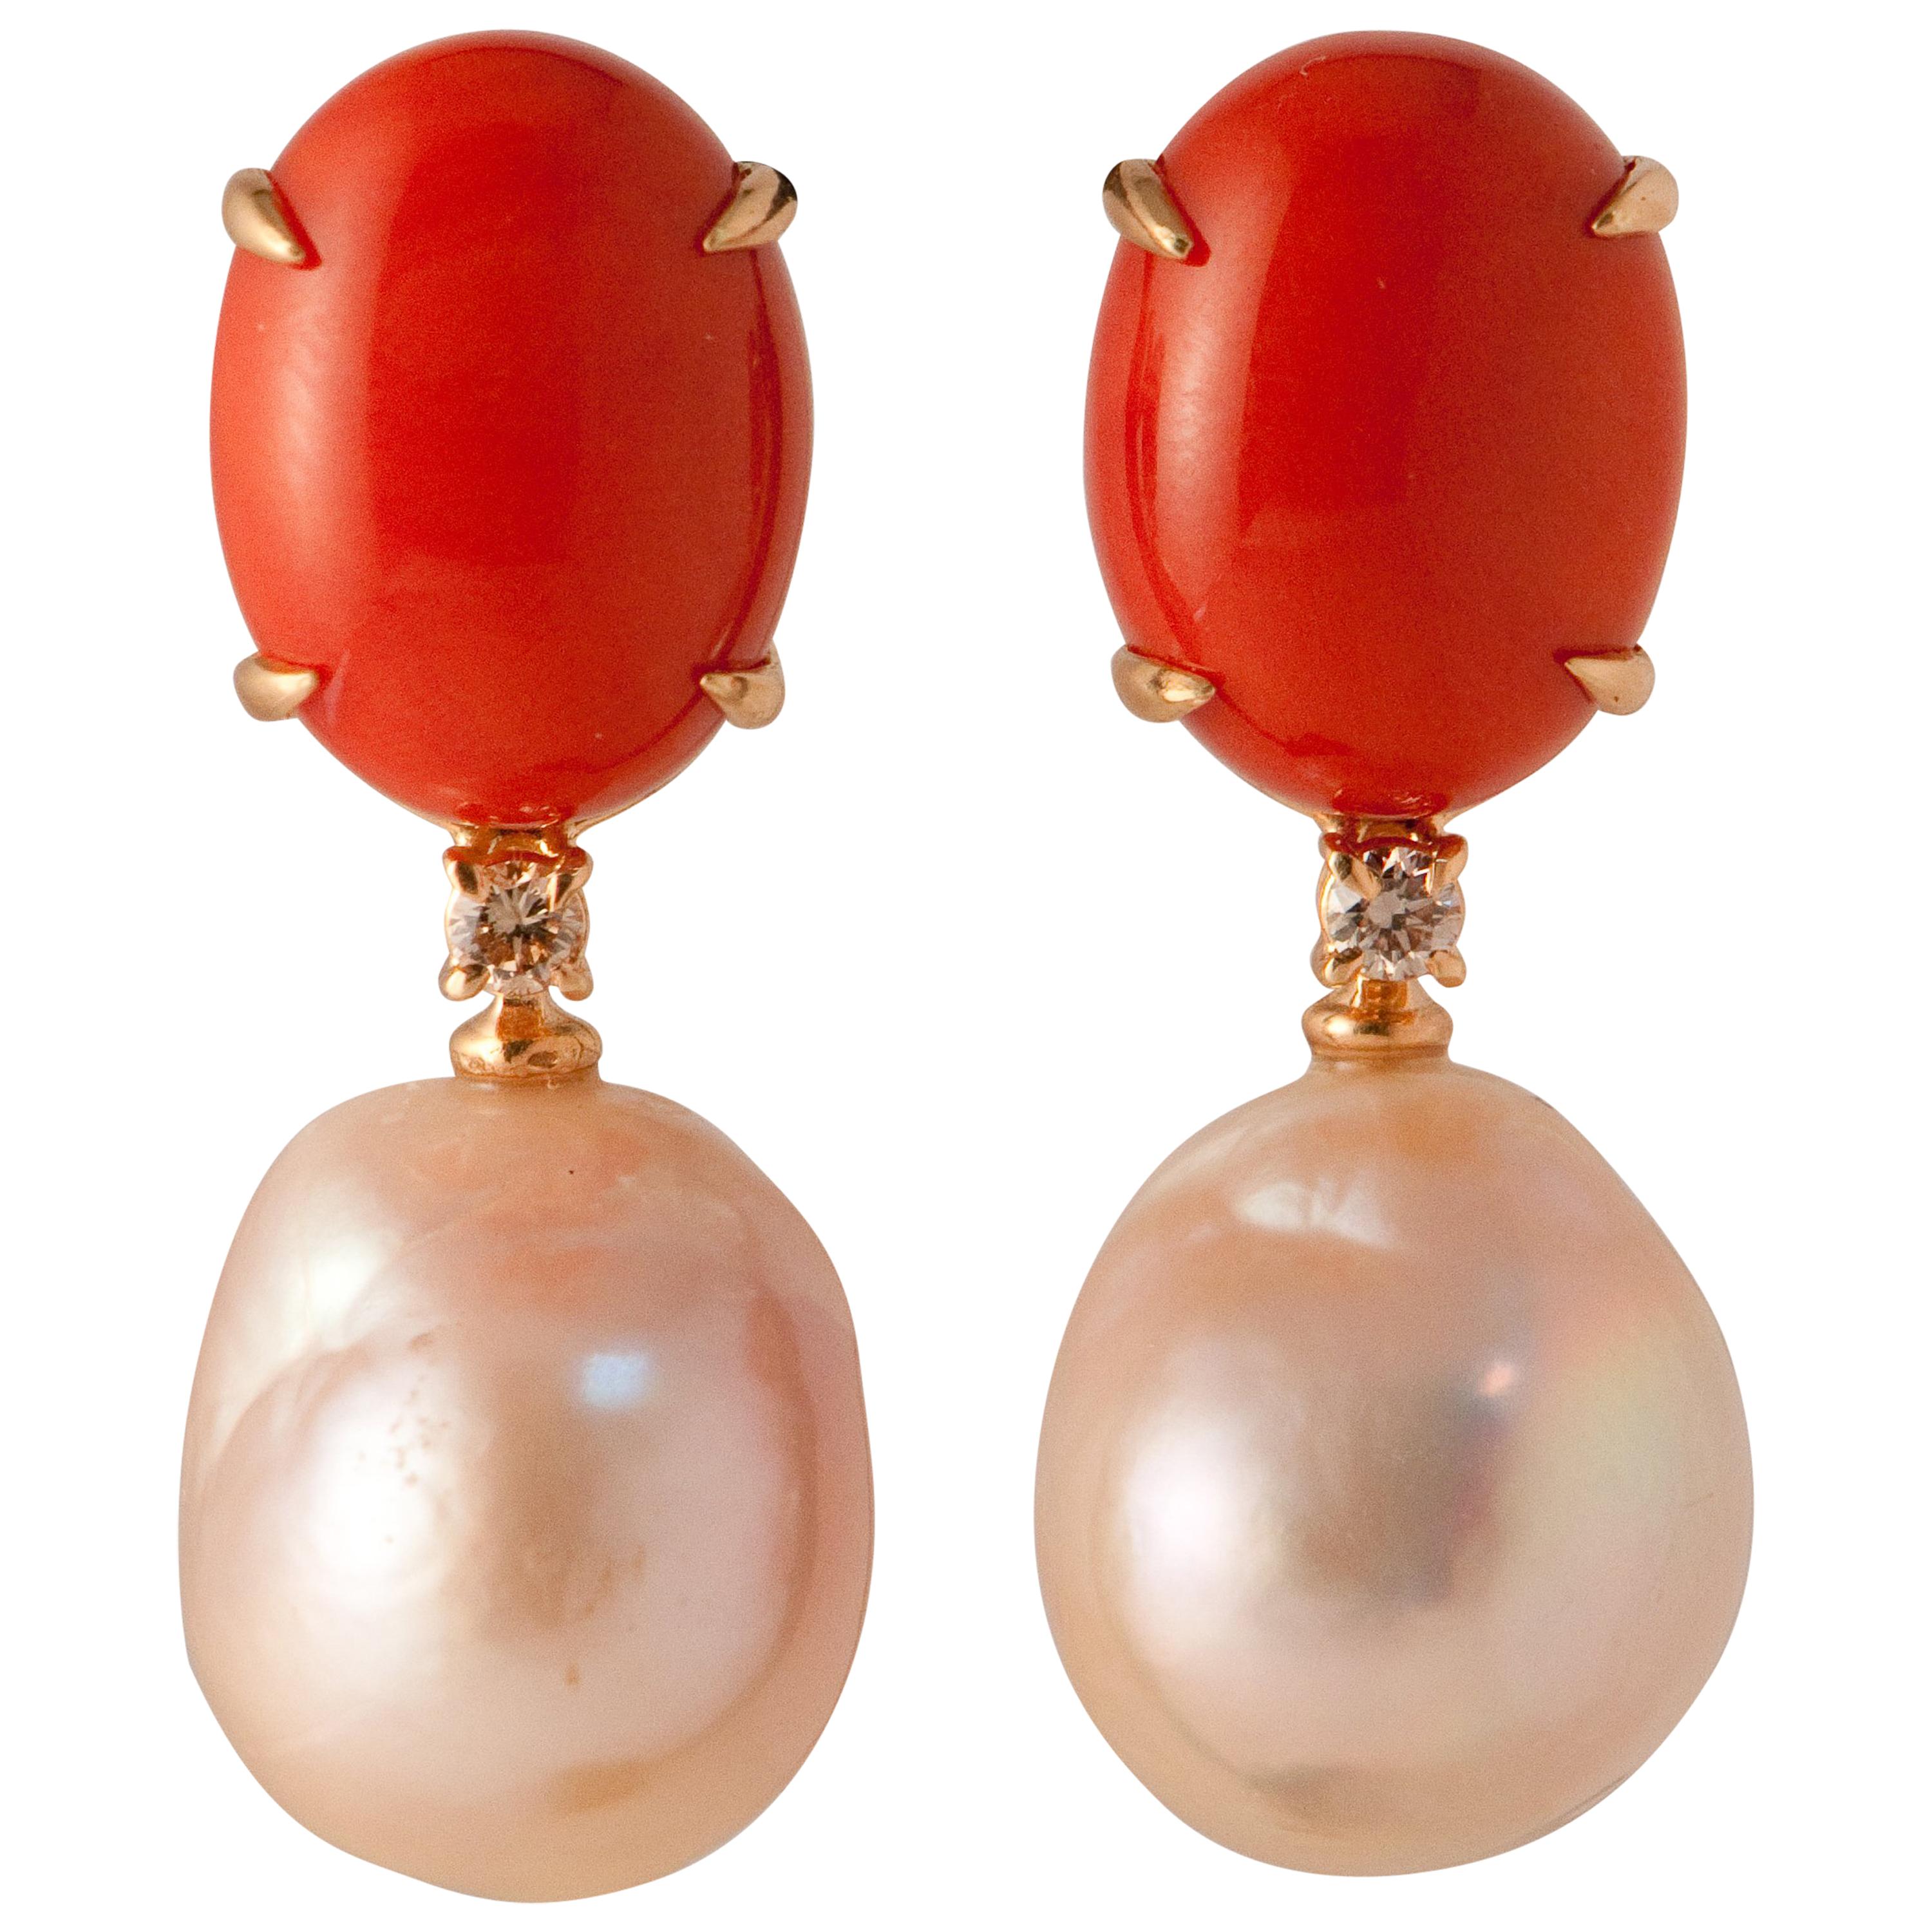 Baroque Pearls Coral and Diamonds Yellow Gold Earrings